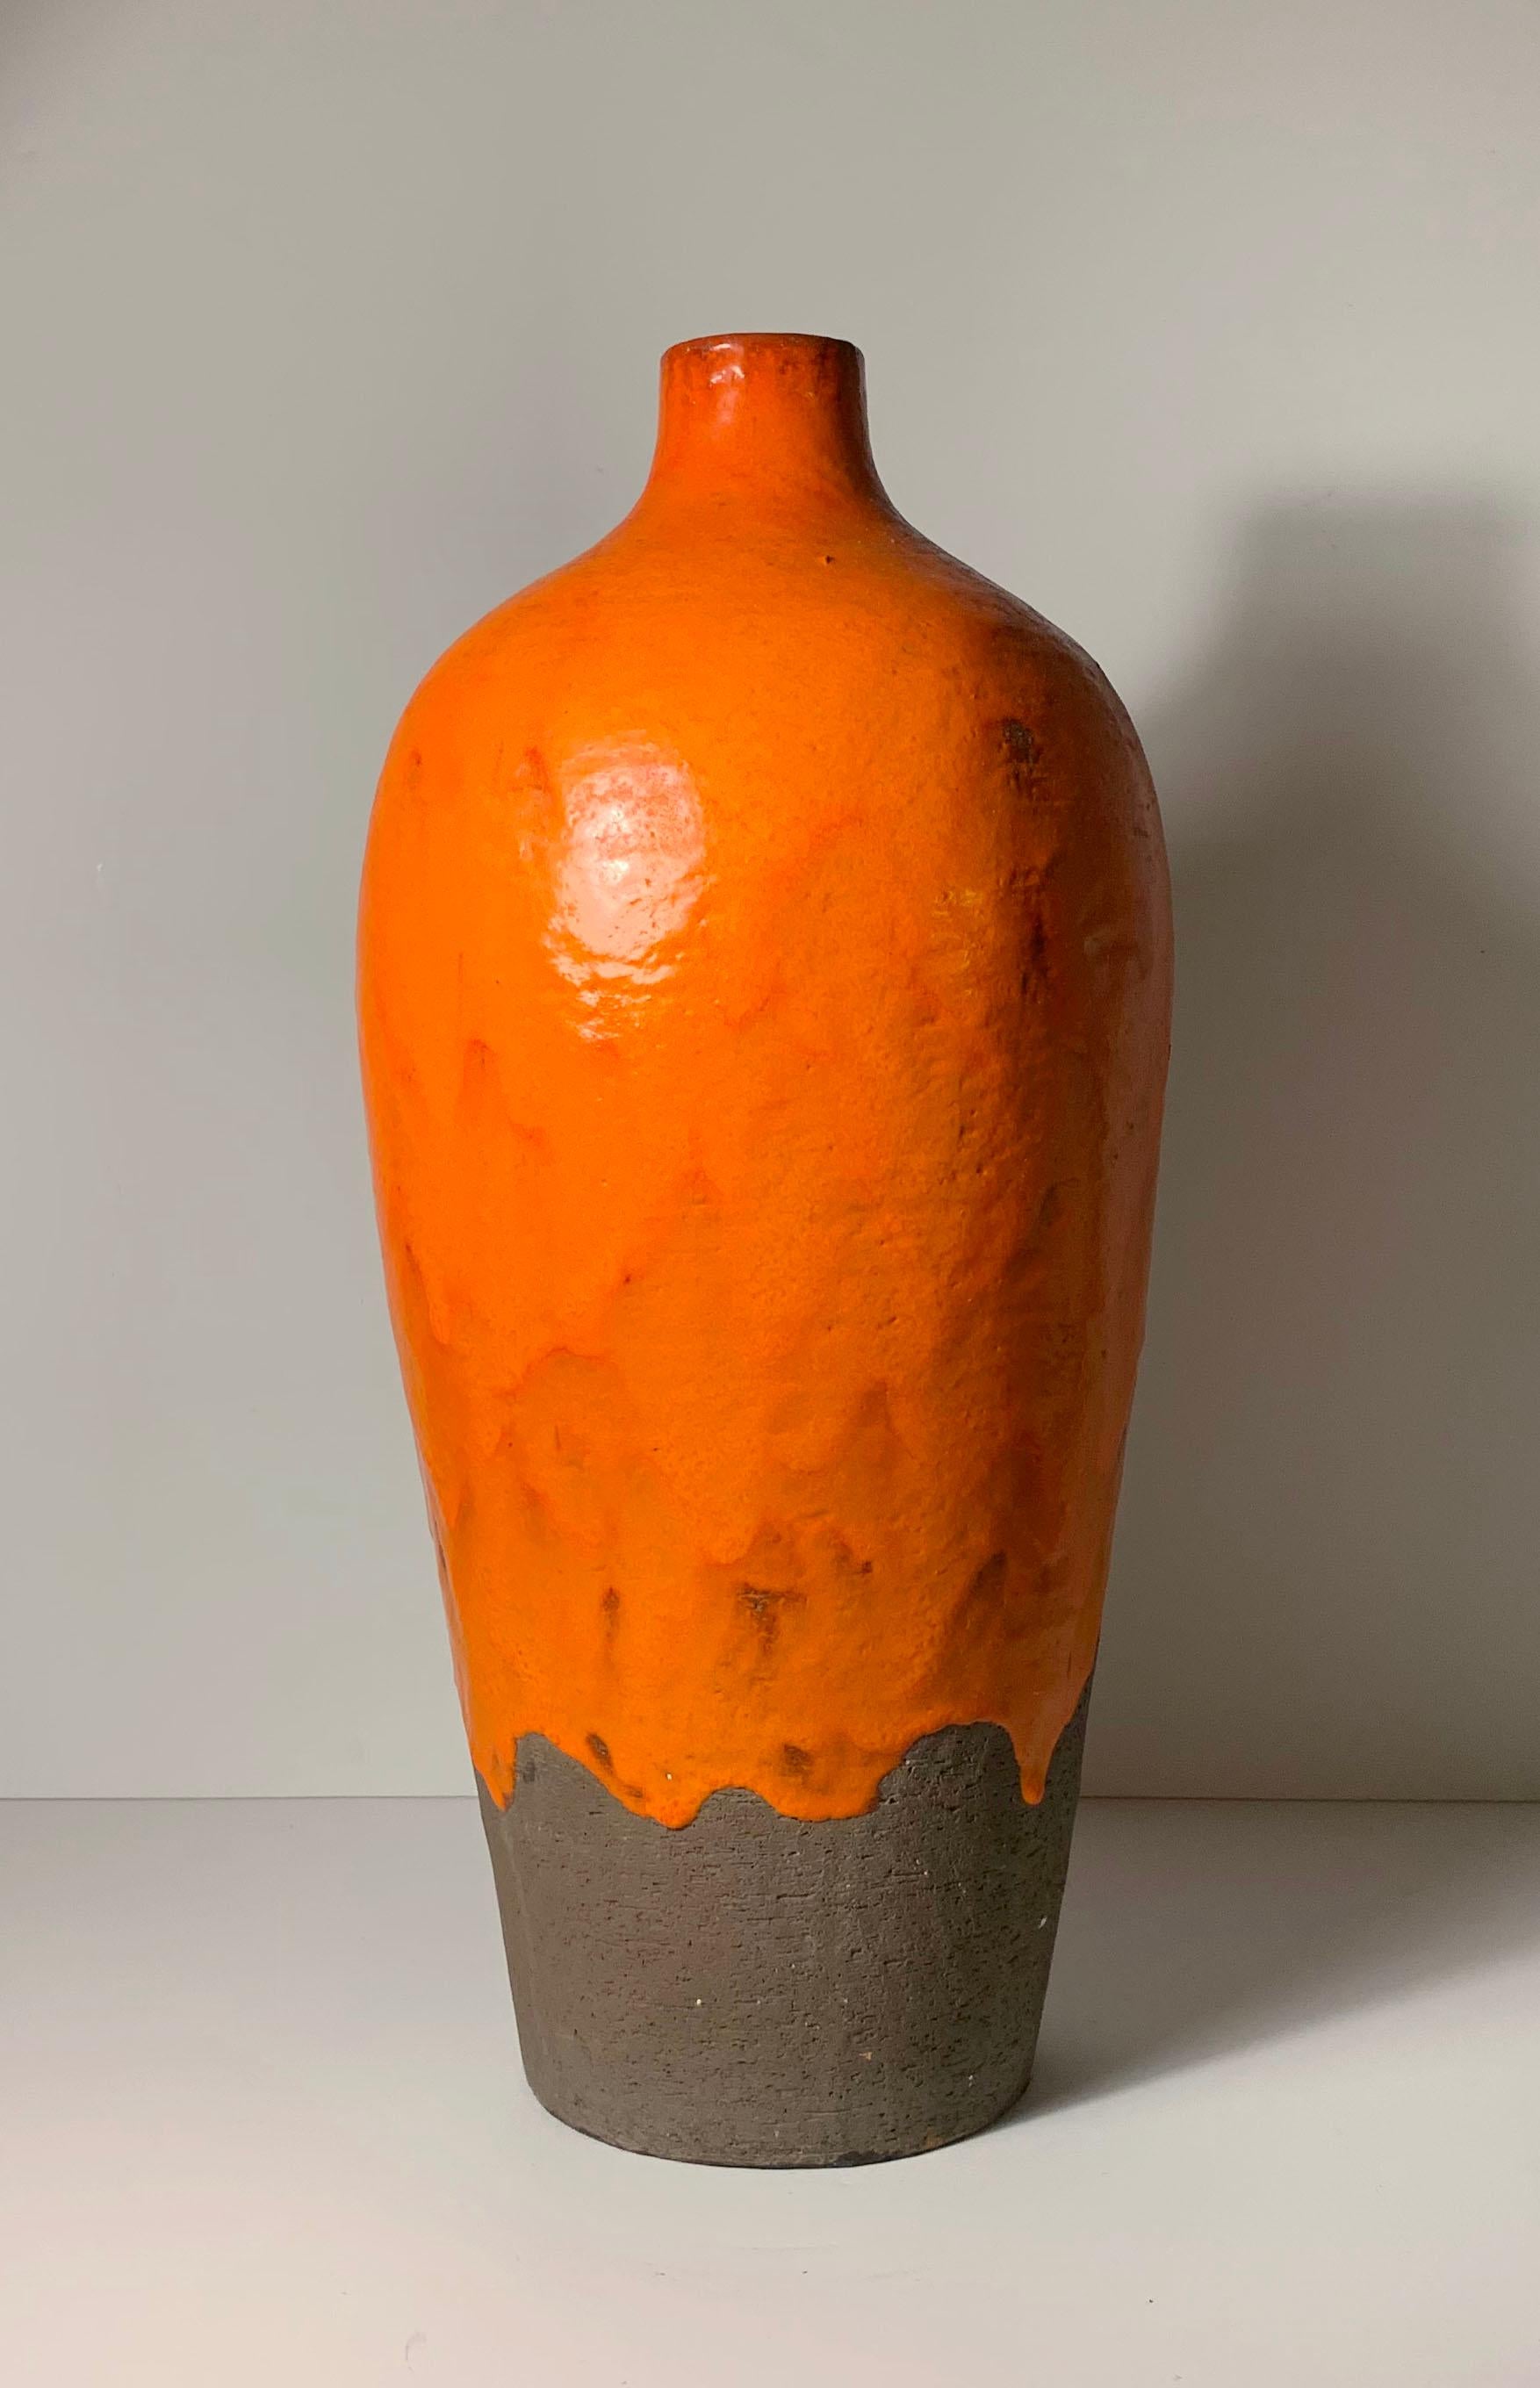 Large midcentury Italian ceramic Lamp attributed to Aldo Londi for Bitossi.

As shown, lamp will need hardware specified with rewiring. 

  